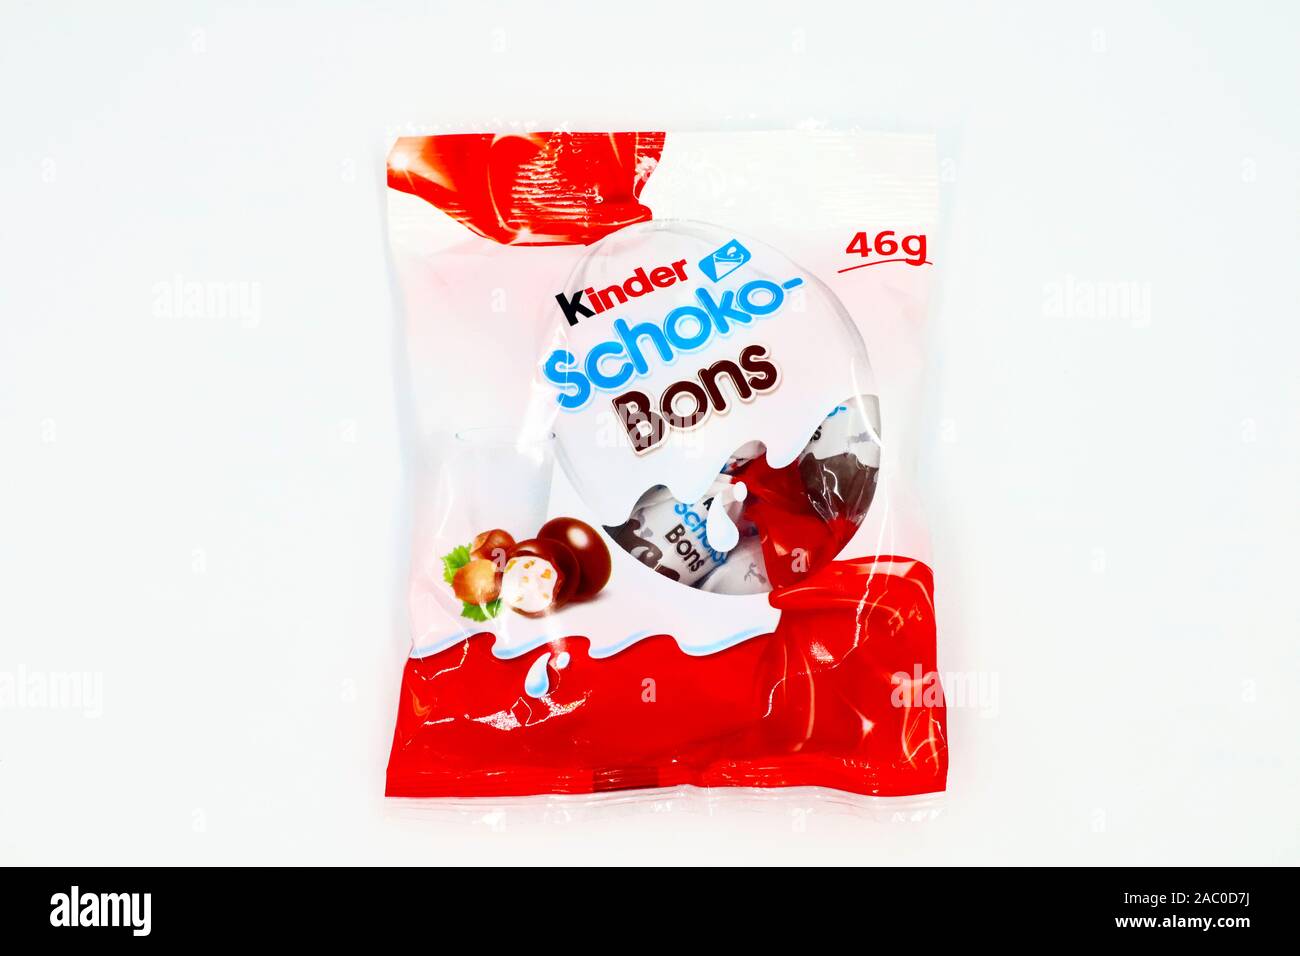 Kinder Schoko Bons Chocolate. Kinder is a brand of food products made in  Italy by Ferrero Stock Photo - Alamy